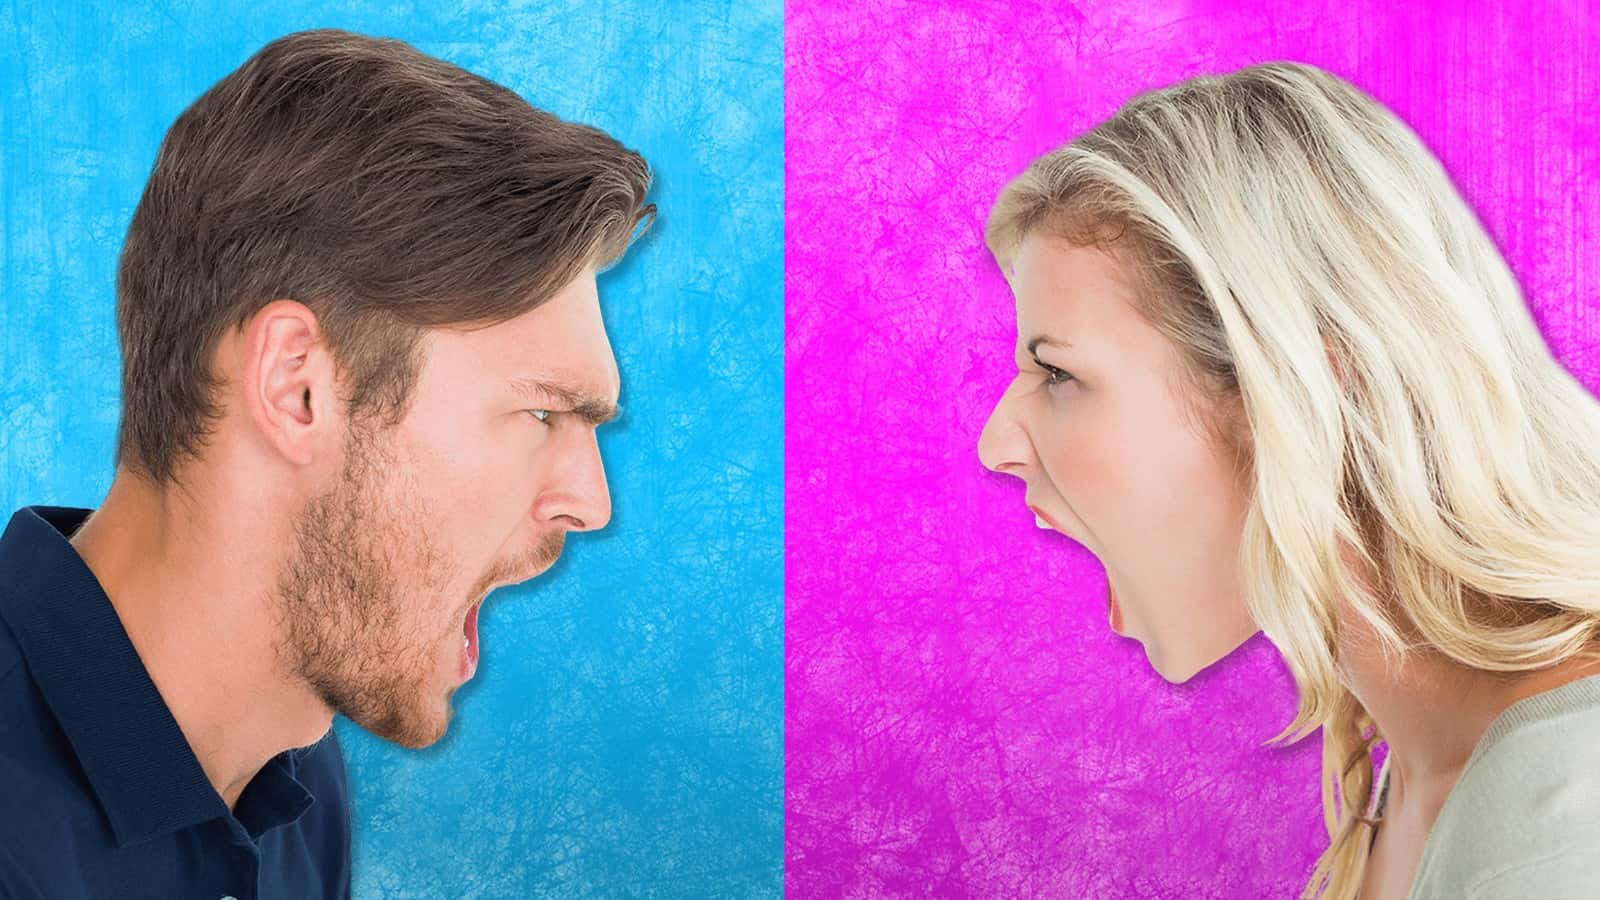 Psychology Explains 5 Ways to Control Your Emotions in an Argument